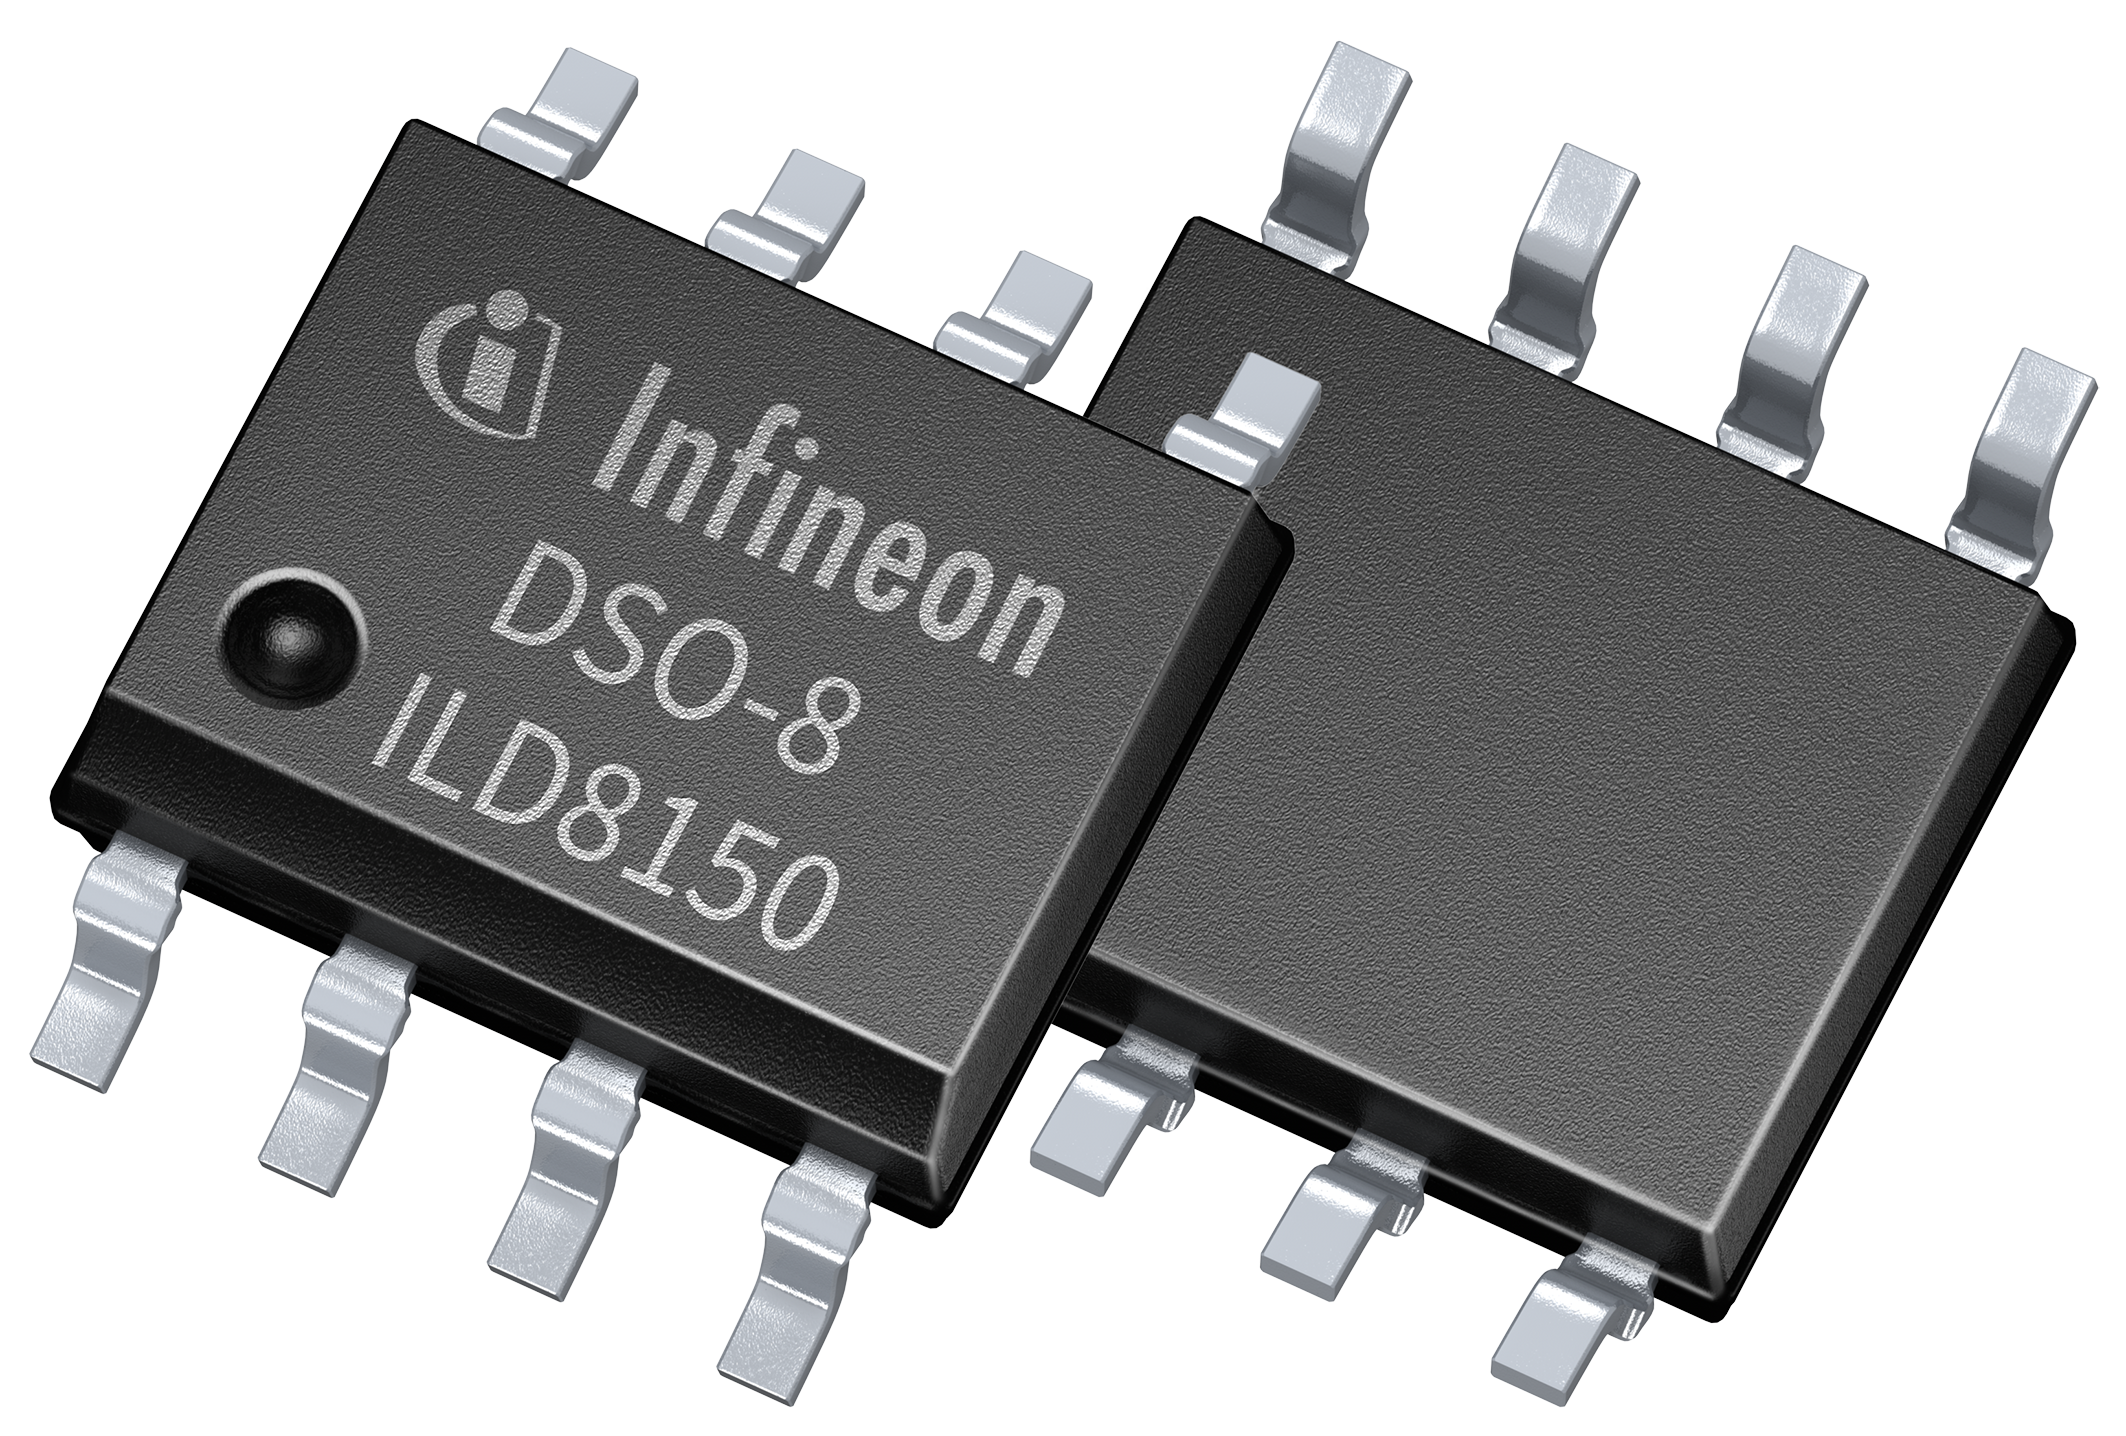 Infineon’s new 80 V DC-DC buck LED driver IC offers excellent dimming performance